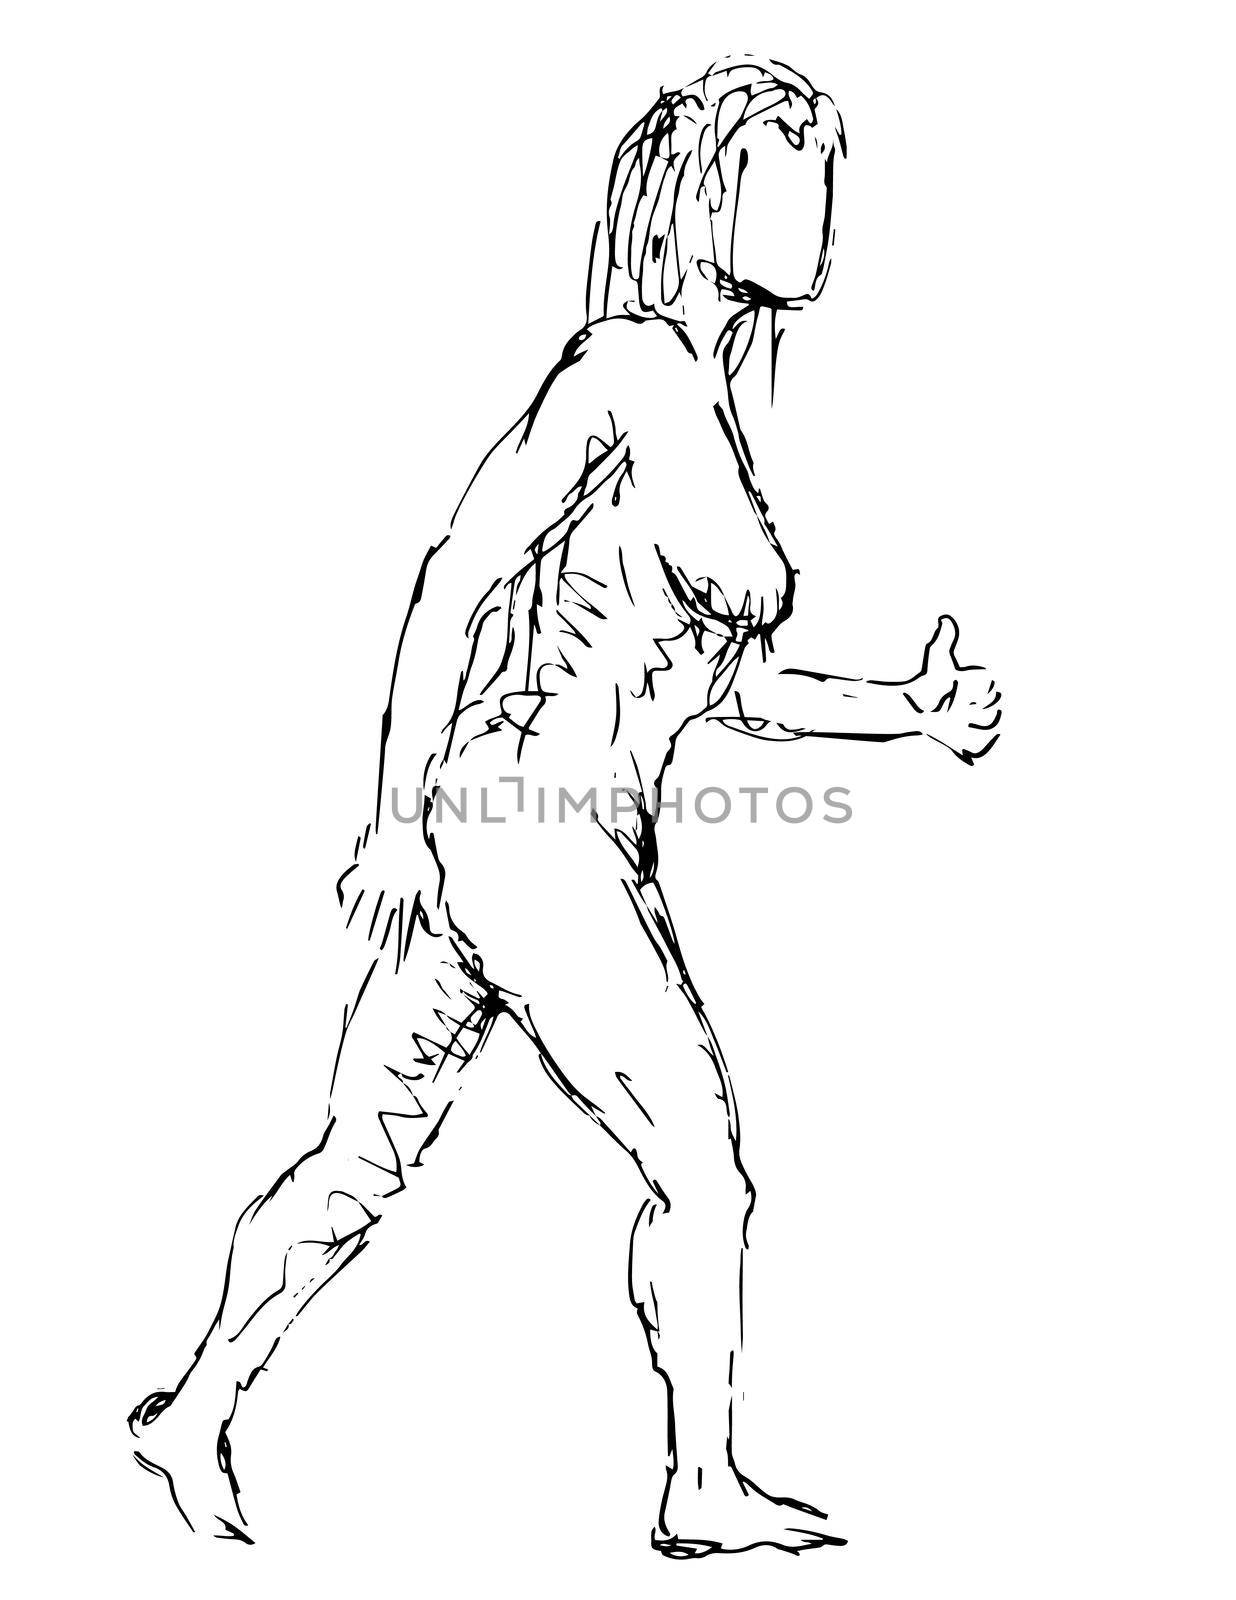 Doodle art illustration of a nude female human figure posing striding with thumb up done in continuous line drawing style in black and white on isolated background.